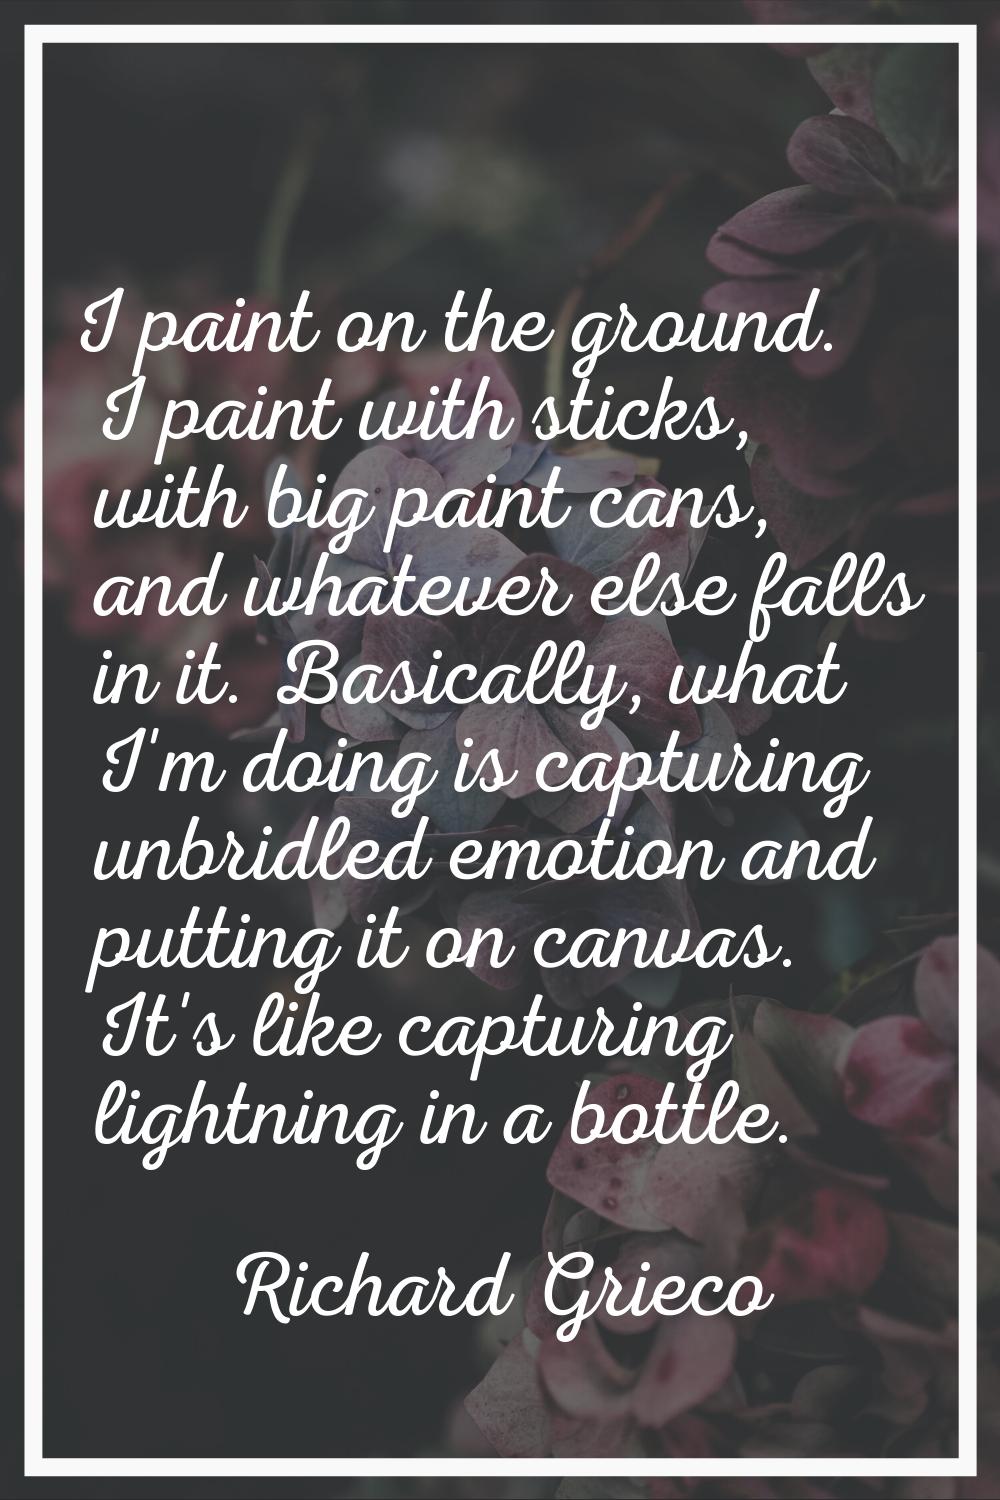 I paint on the ground. I paint with sticks, with big paint cans, and whatever else falls in it. Bas